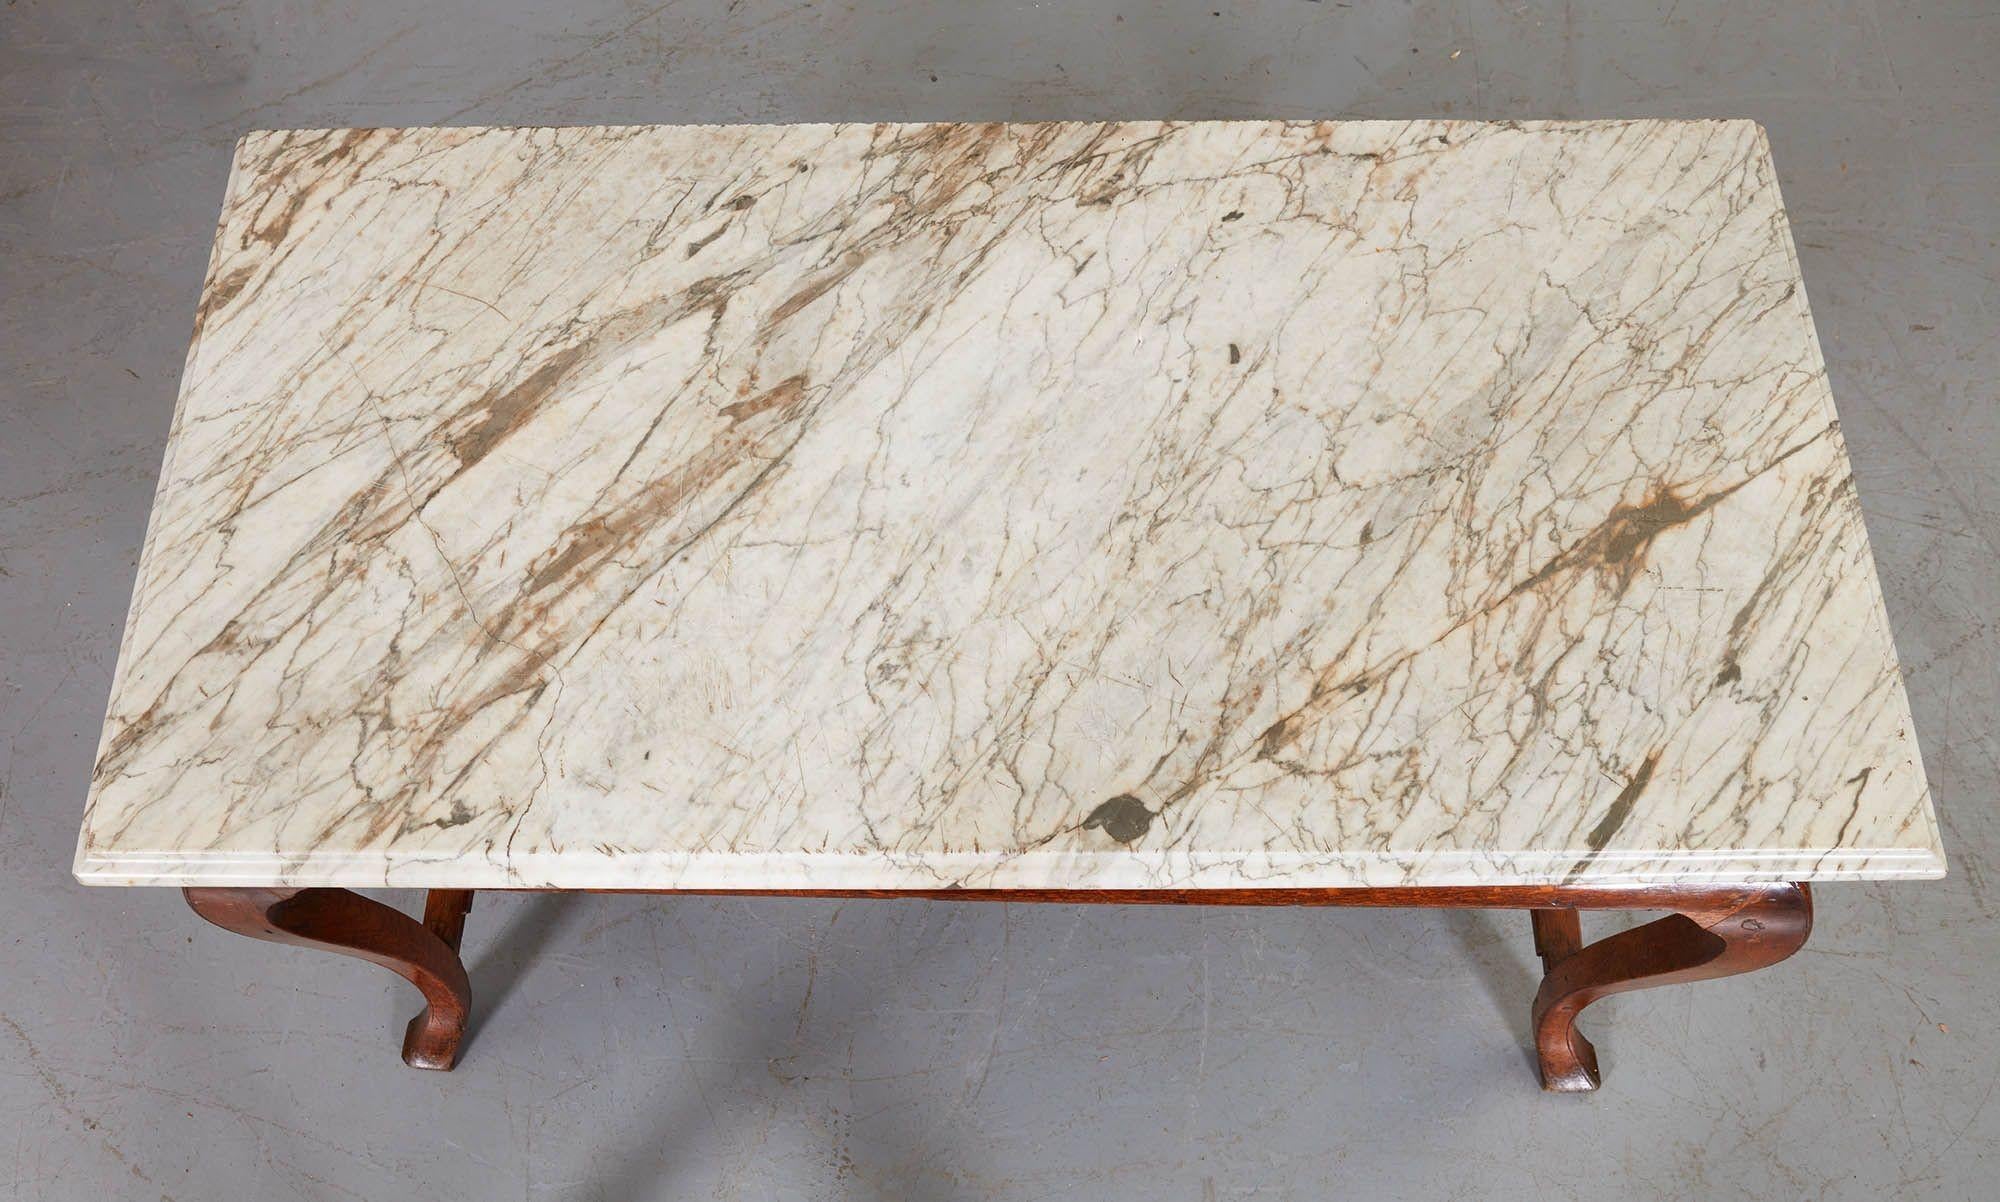 Fine and elegant early Georgian oak marble top console table in the Chinese taste, the original veined marble top with ogee edge, over a similarly molded base, the square cabriole legs with mitered joints in the Chinese manner, joined by scrolled